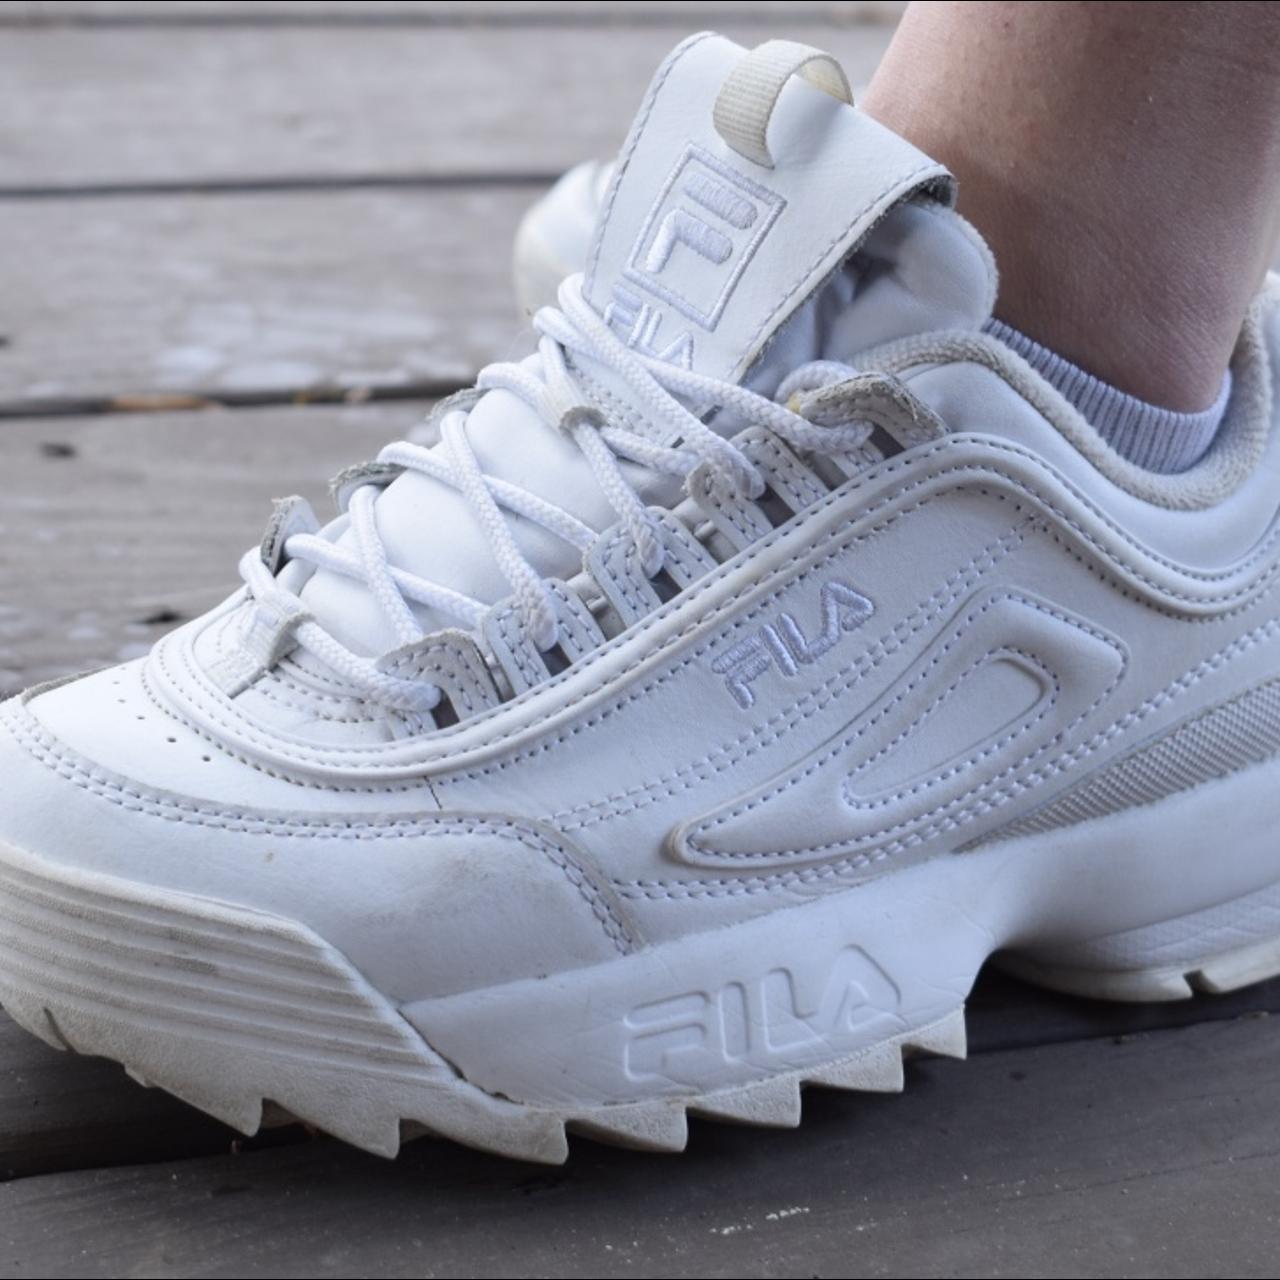 Product Image 2 - FILA Women’s Disruptor II

Condition: Great
Color: